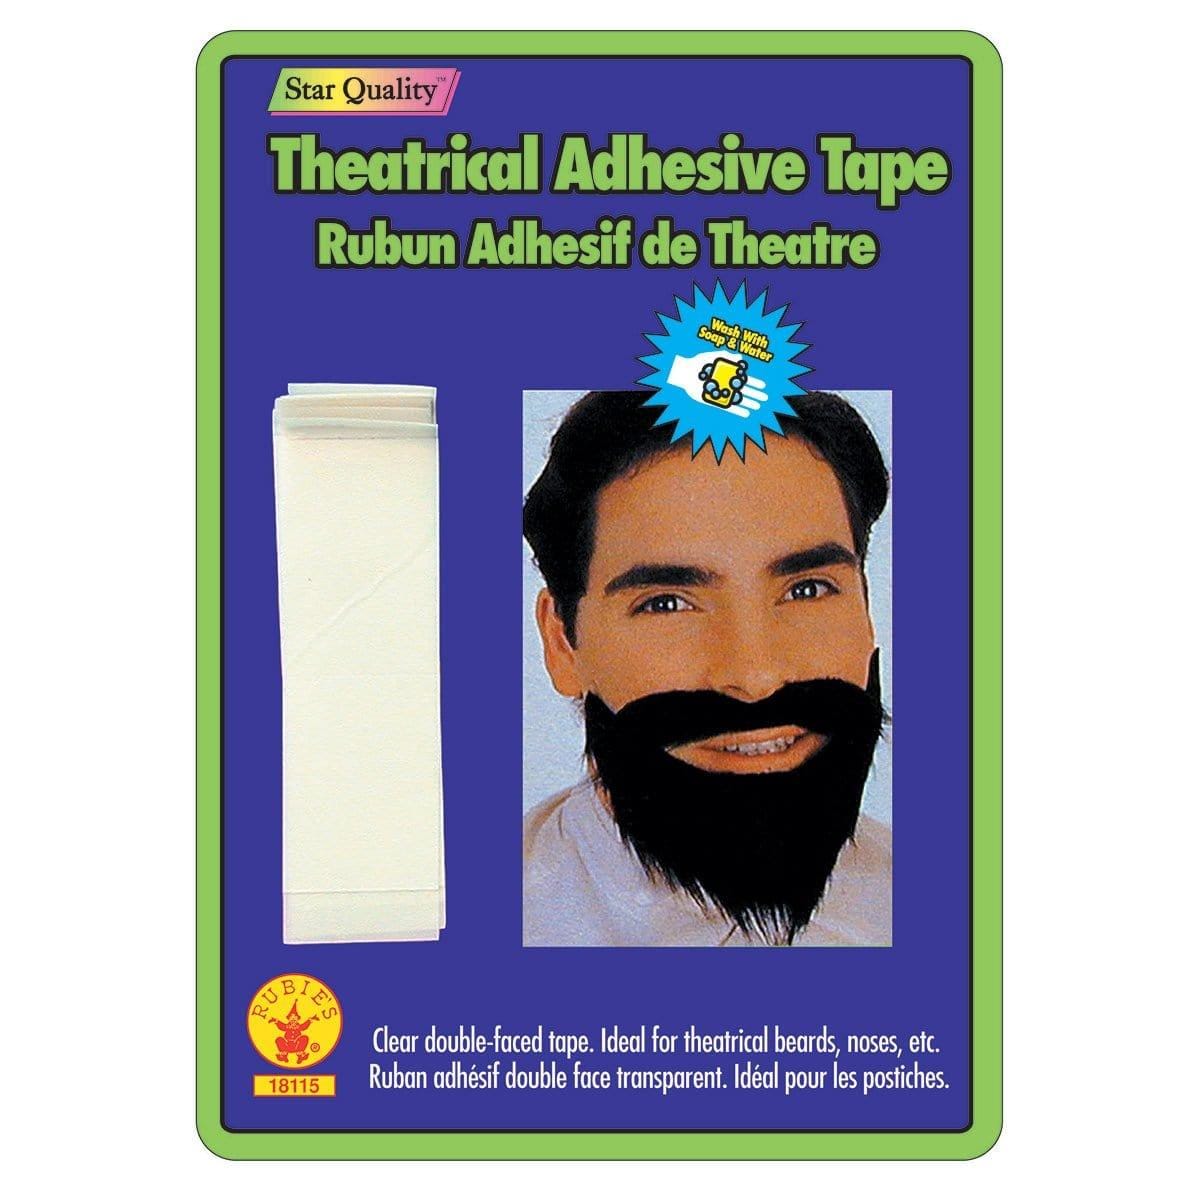 Buy Costume Accessories Theatrical adhesive tape, 6 per package sold at Party Expert